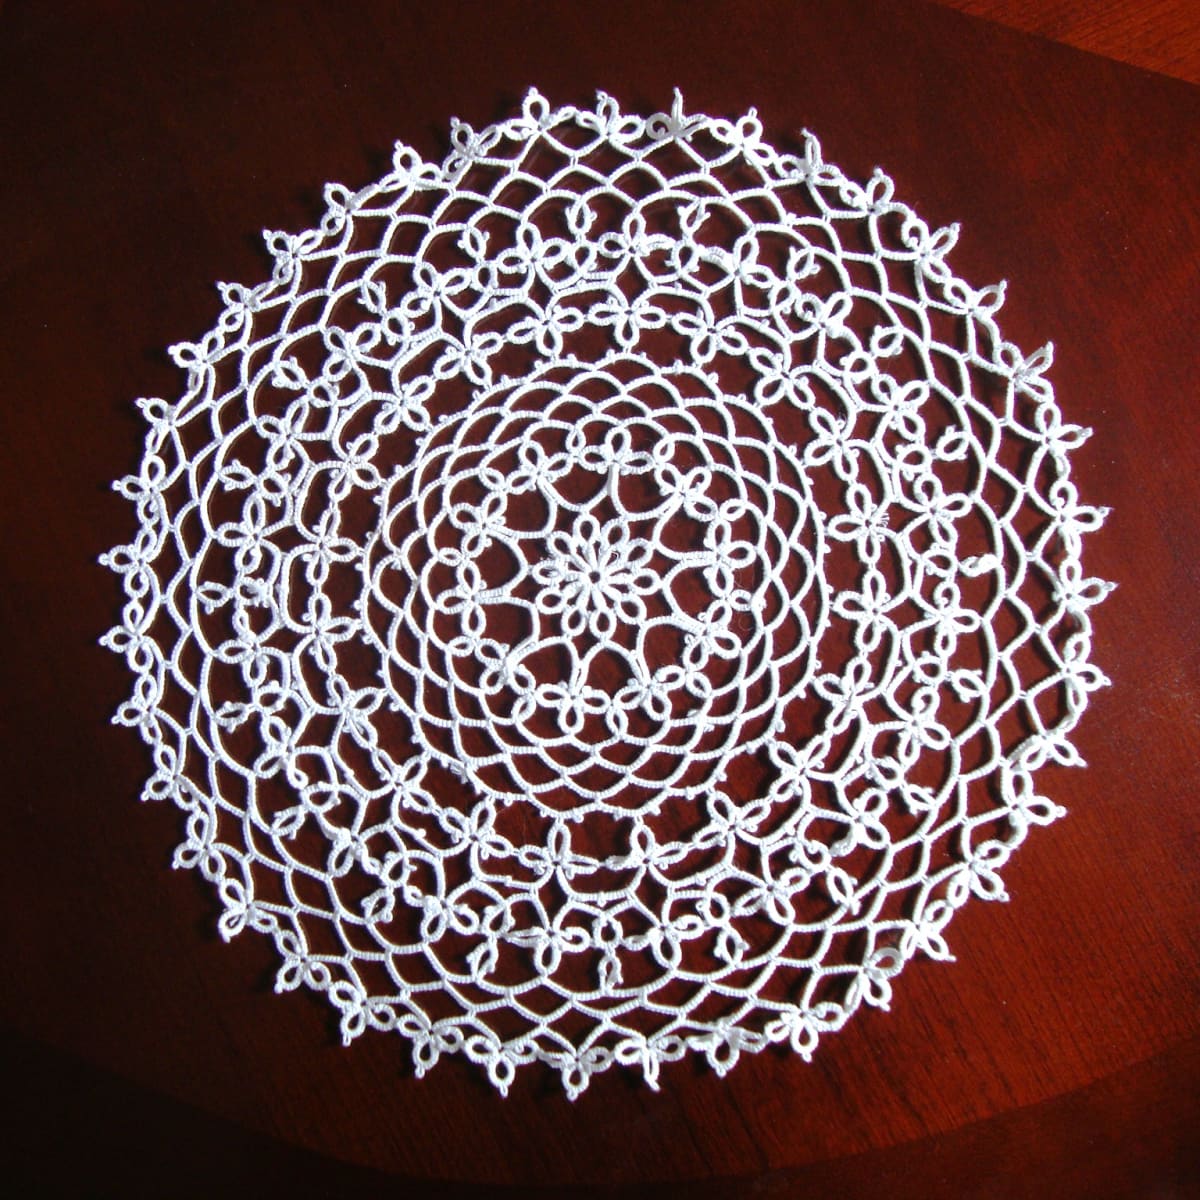 Shuttle Tatting Tips: 4 Techniques to Improve Your Tatting 